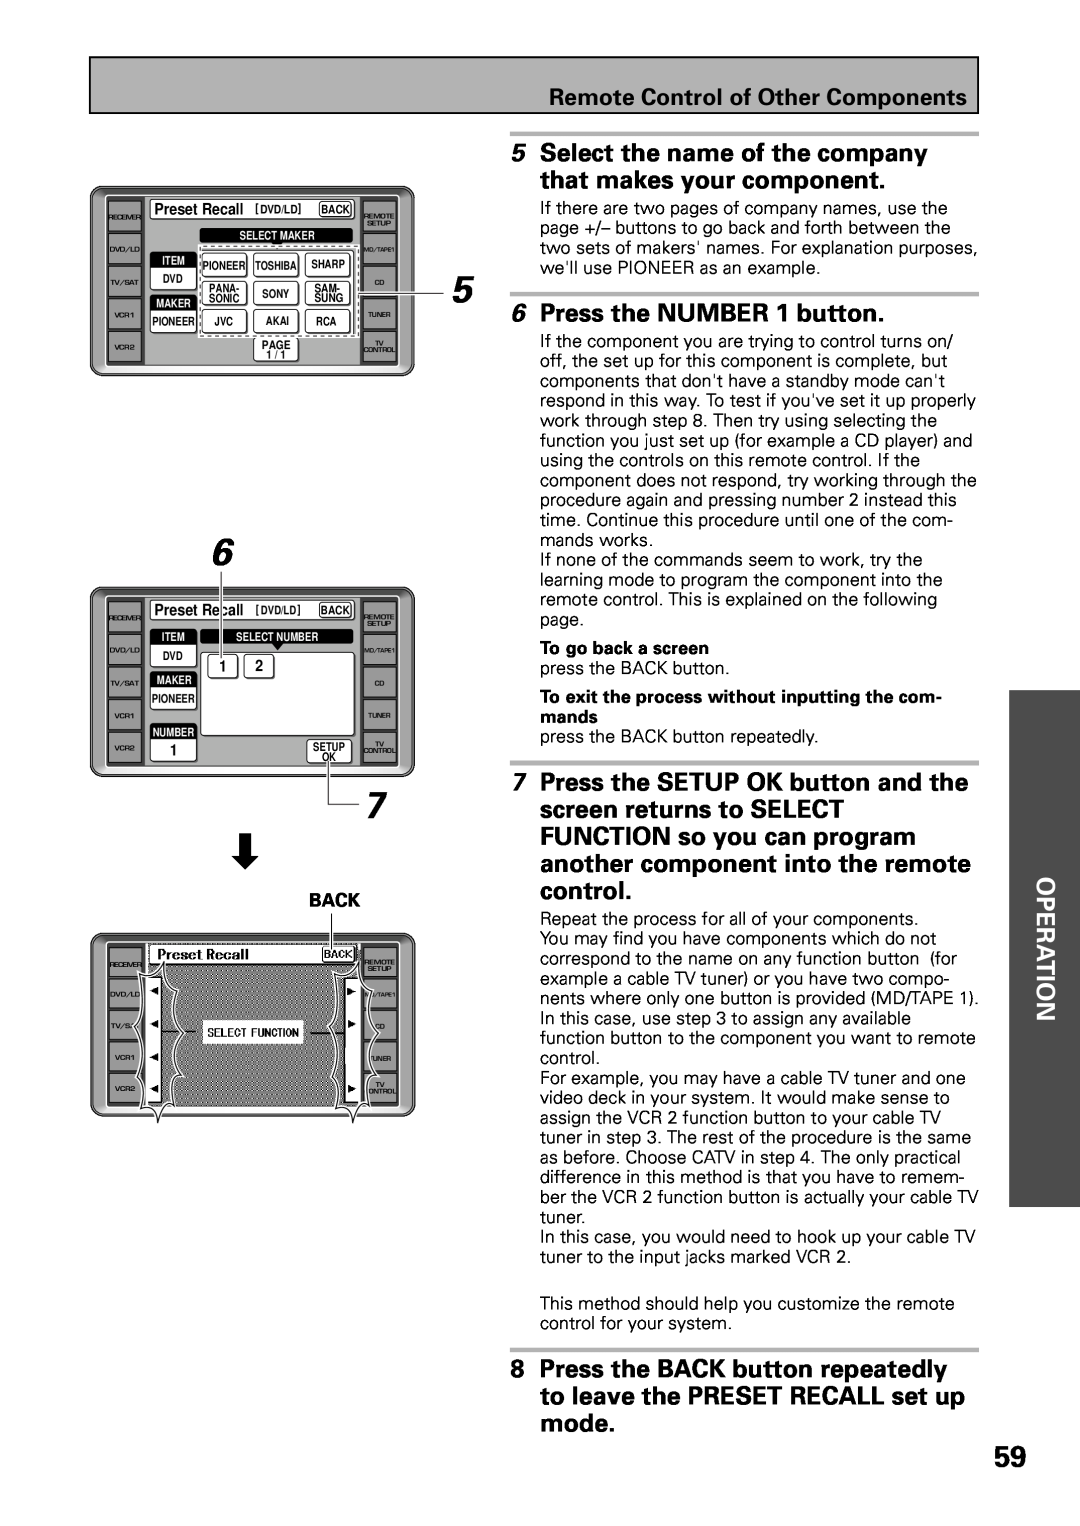 Pioneer VSX-39TX 5Select the name of the company, that makes your component, 6Press the NUMBER 1 button, control, Back 